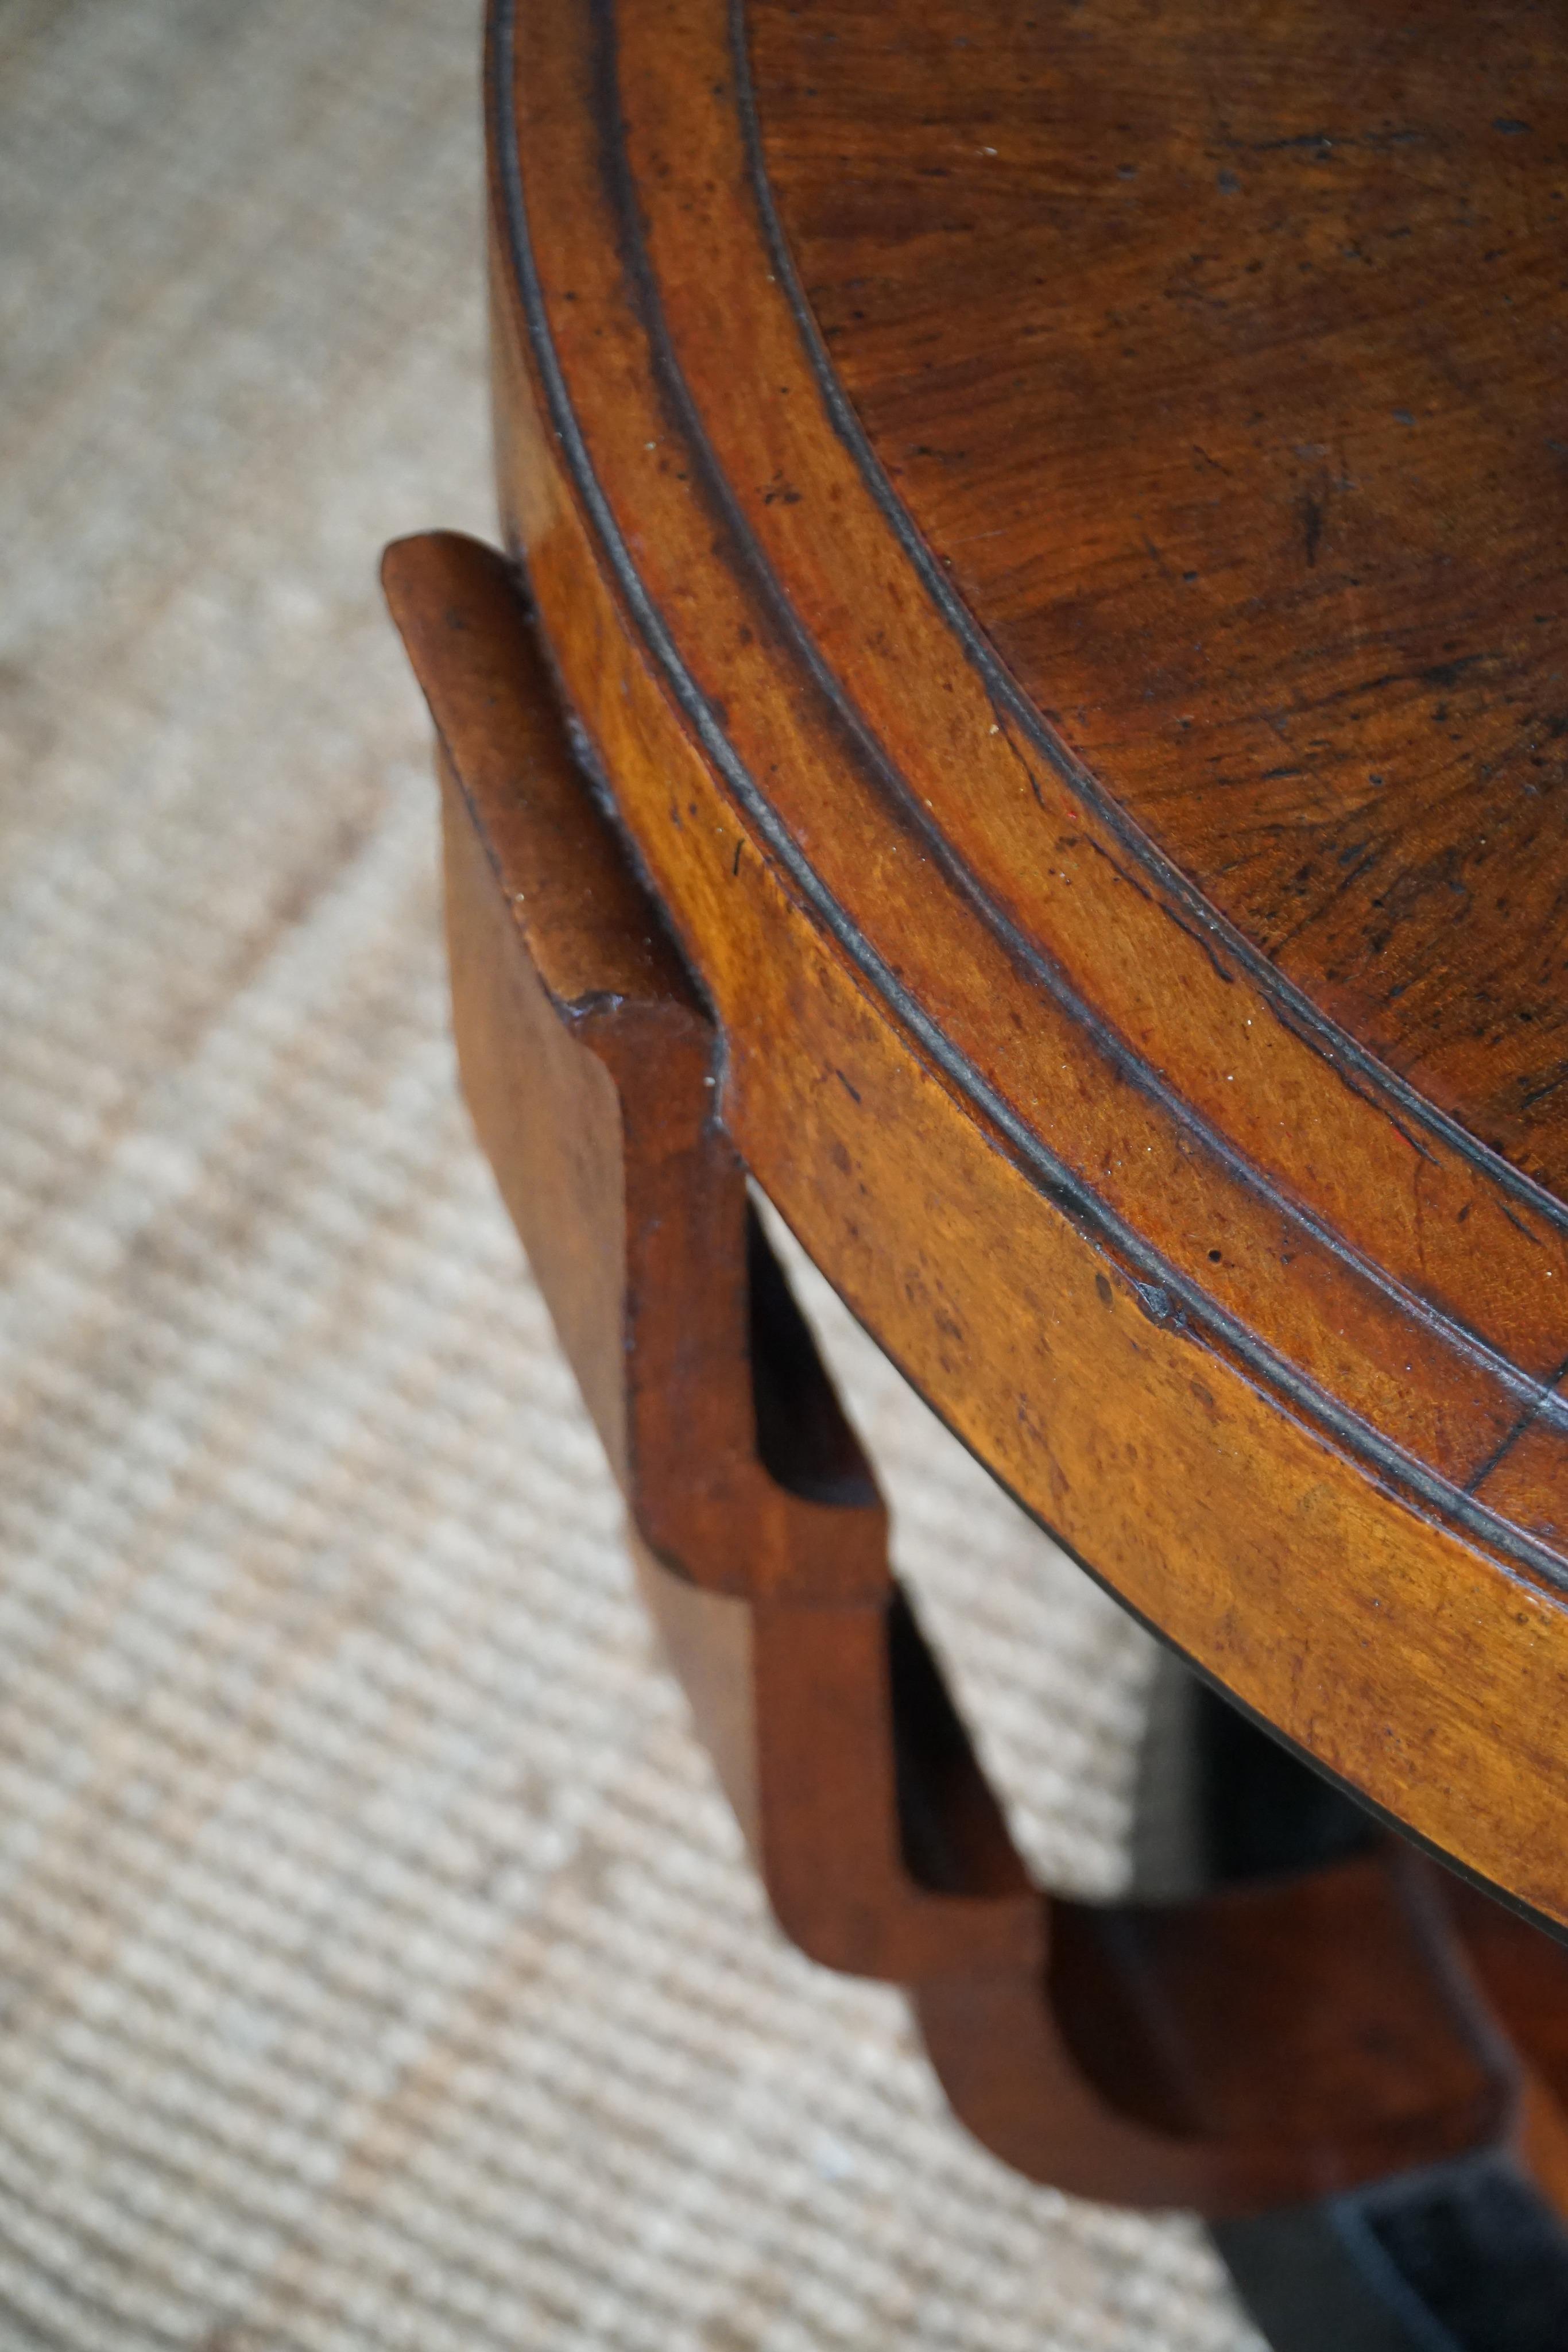 Art Deco, Large Round Sofa Table in Walnut, By a Danish Cabinetmaker, 1930s For Sale 1